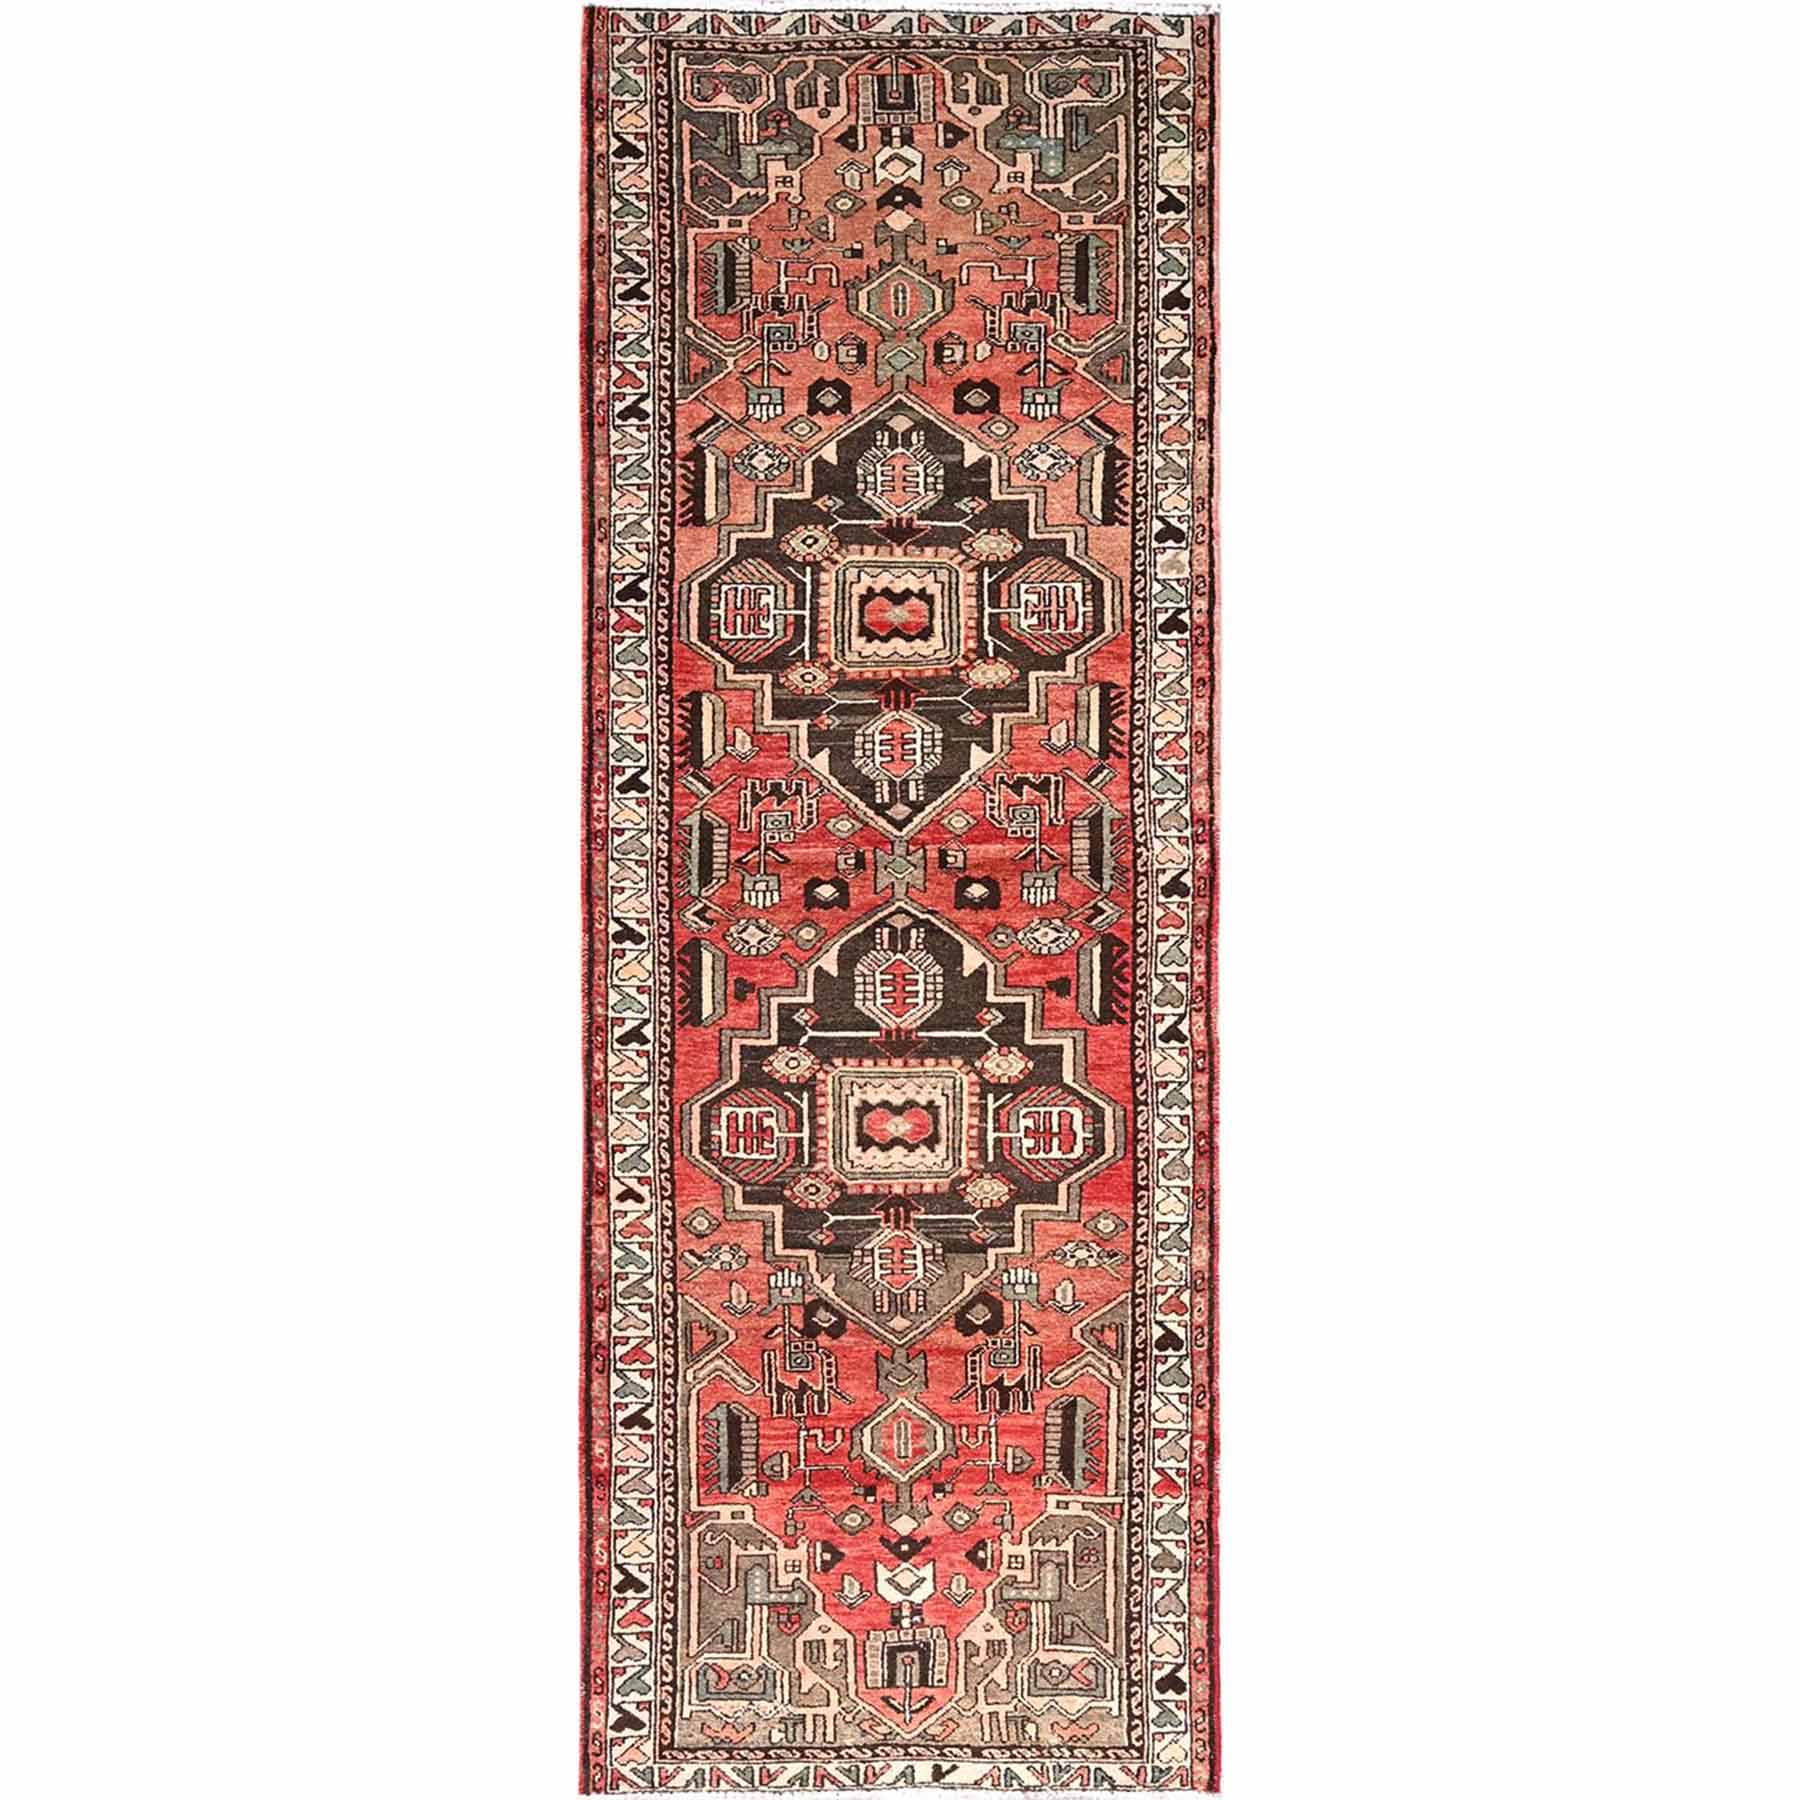 Overdyed-Vintage-Hand-Knotted-Rug-429740